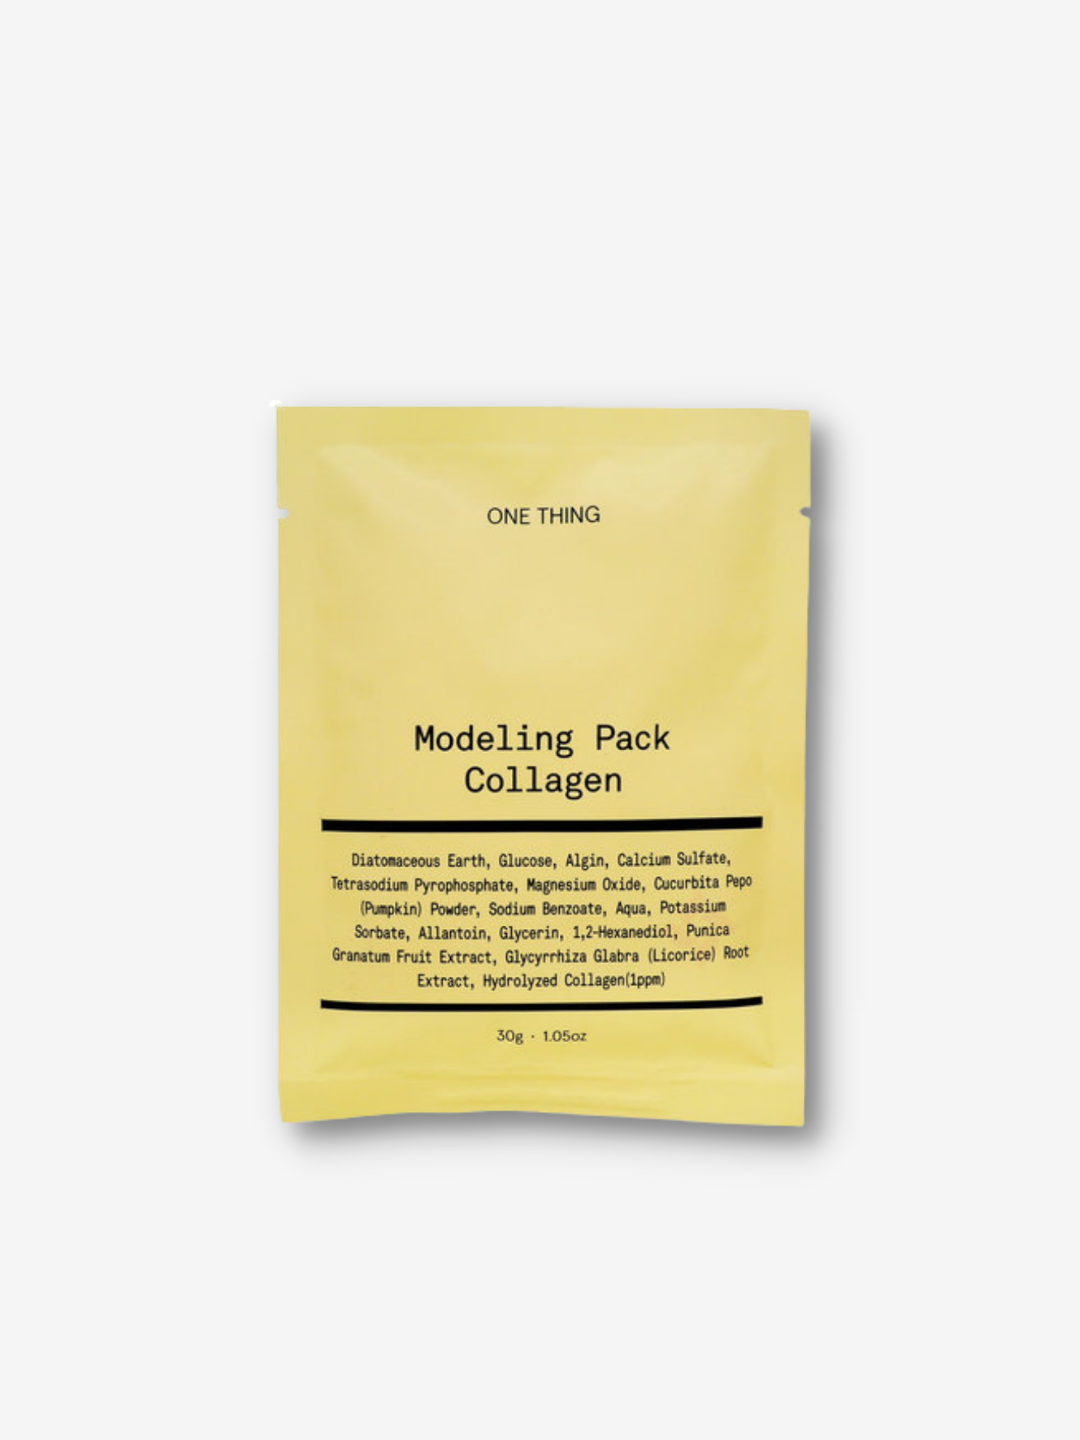 ONE THING - Collagen Modeling Pack - 30g